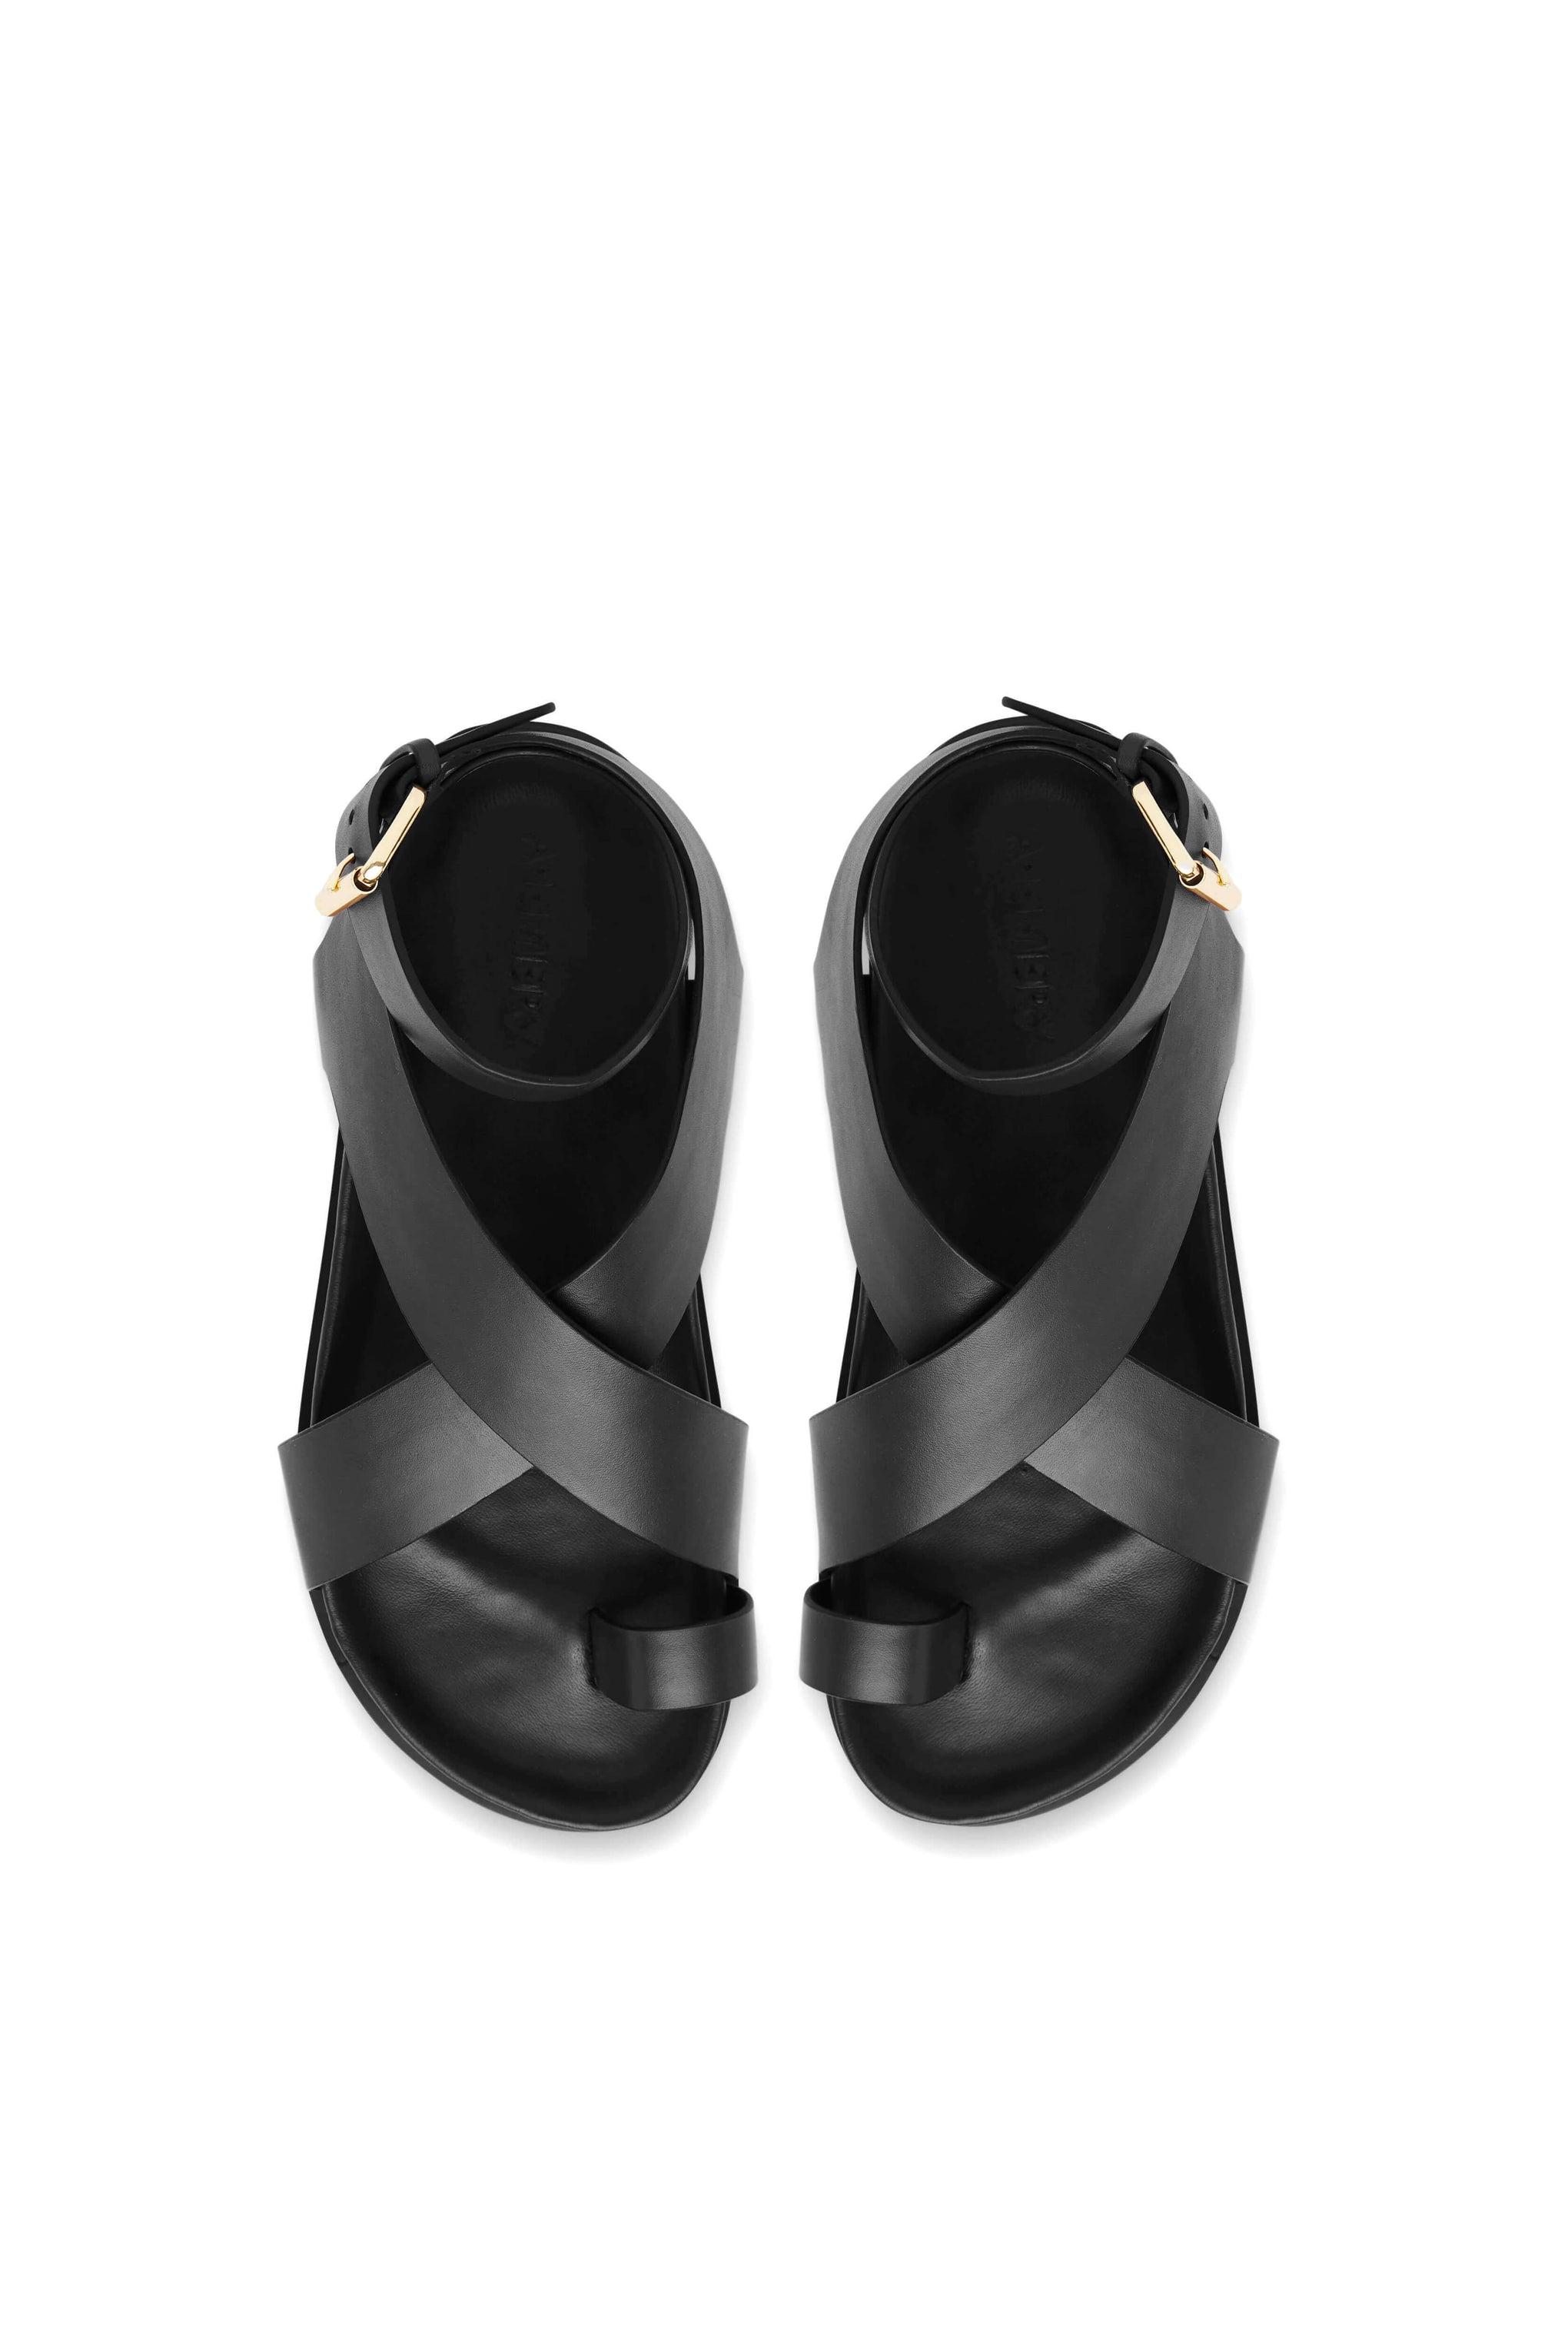 A.Emery Jalen Sandal in Black from The New Trend